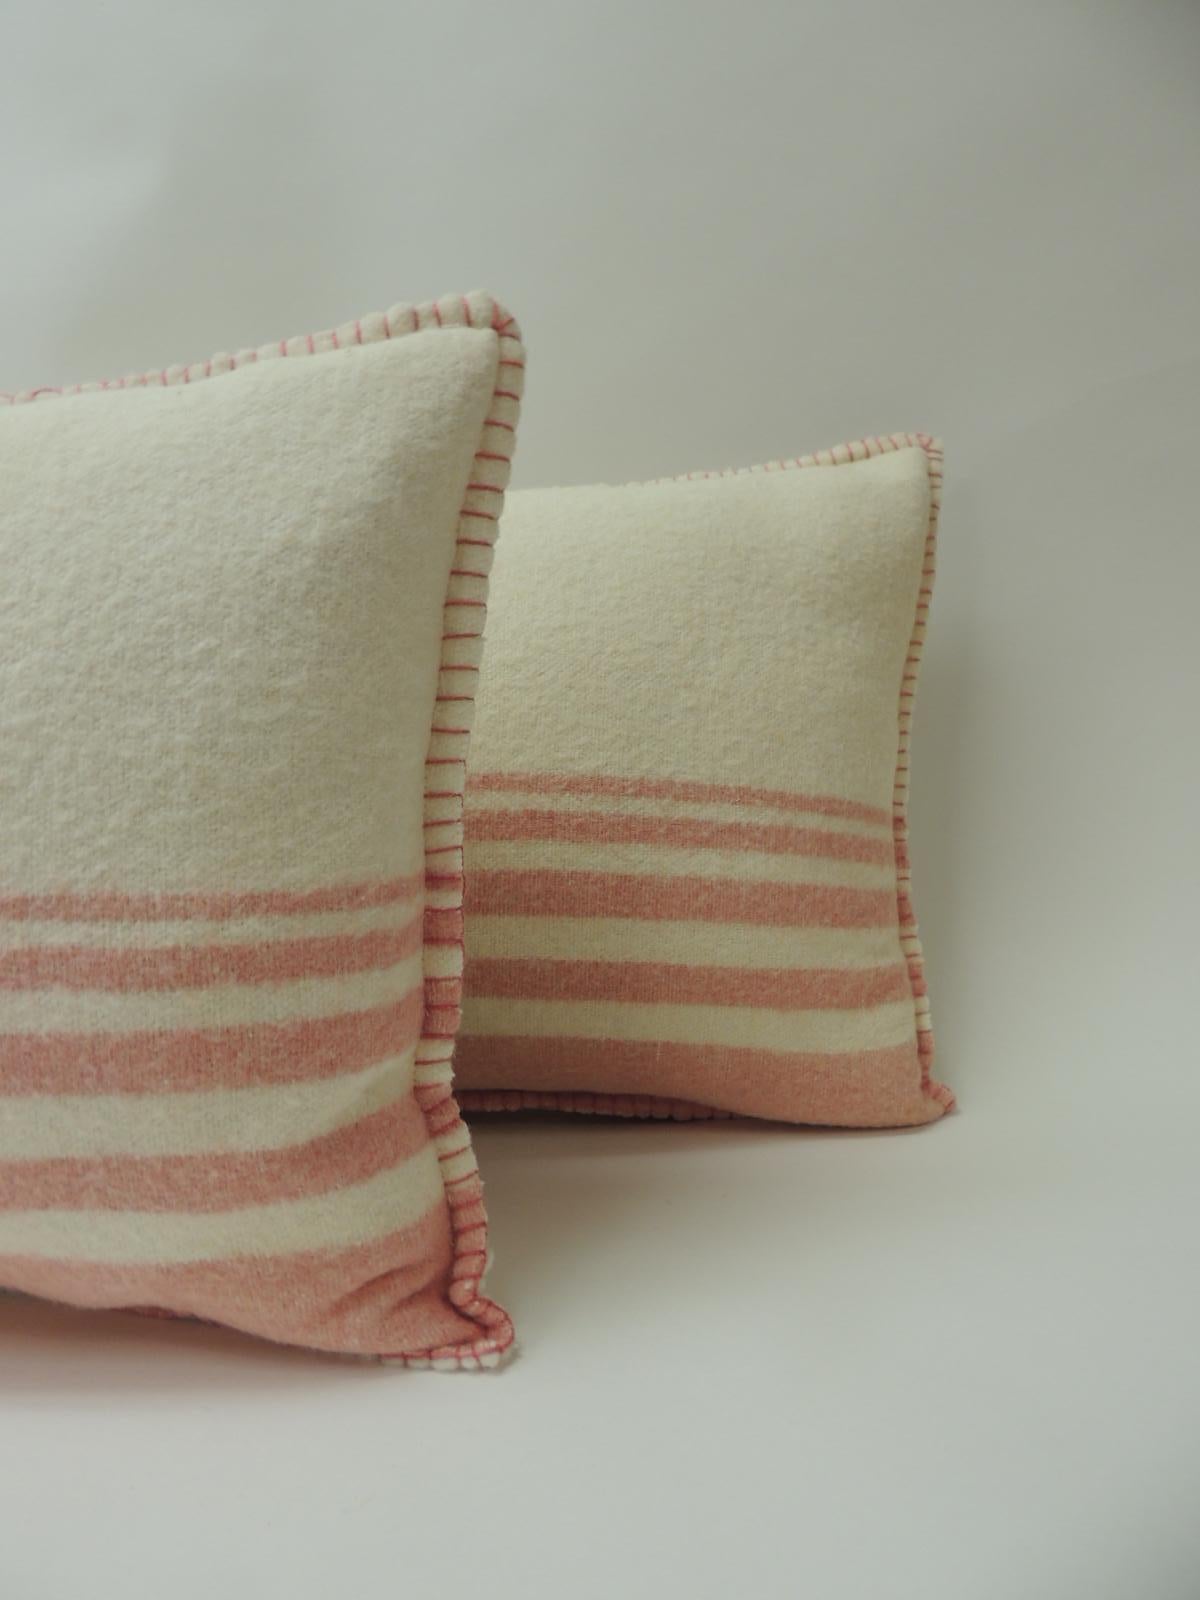 Pair of Vintage Natural & Pink Stripes English Wool Decorative Lumbar Pillows.
These pillows were hand-crafted and designed from an old English blanket using the border as a front and the solid field as backings. Decorative pillows embellished with